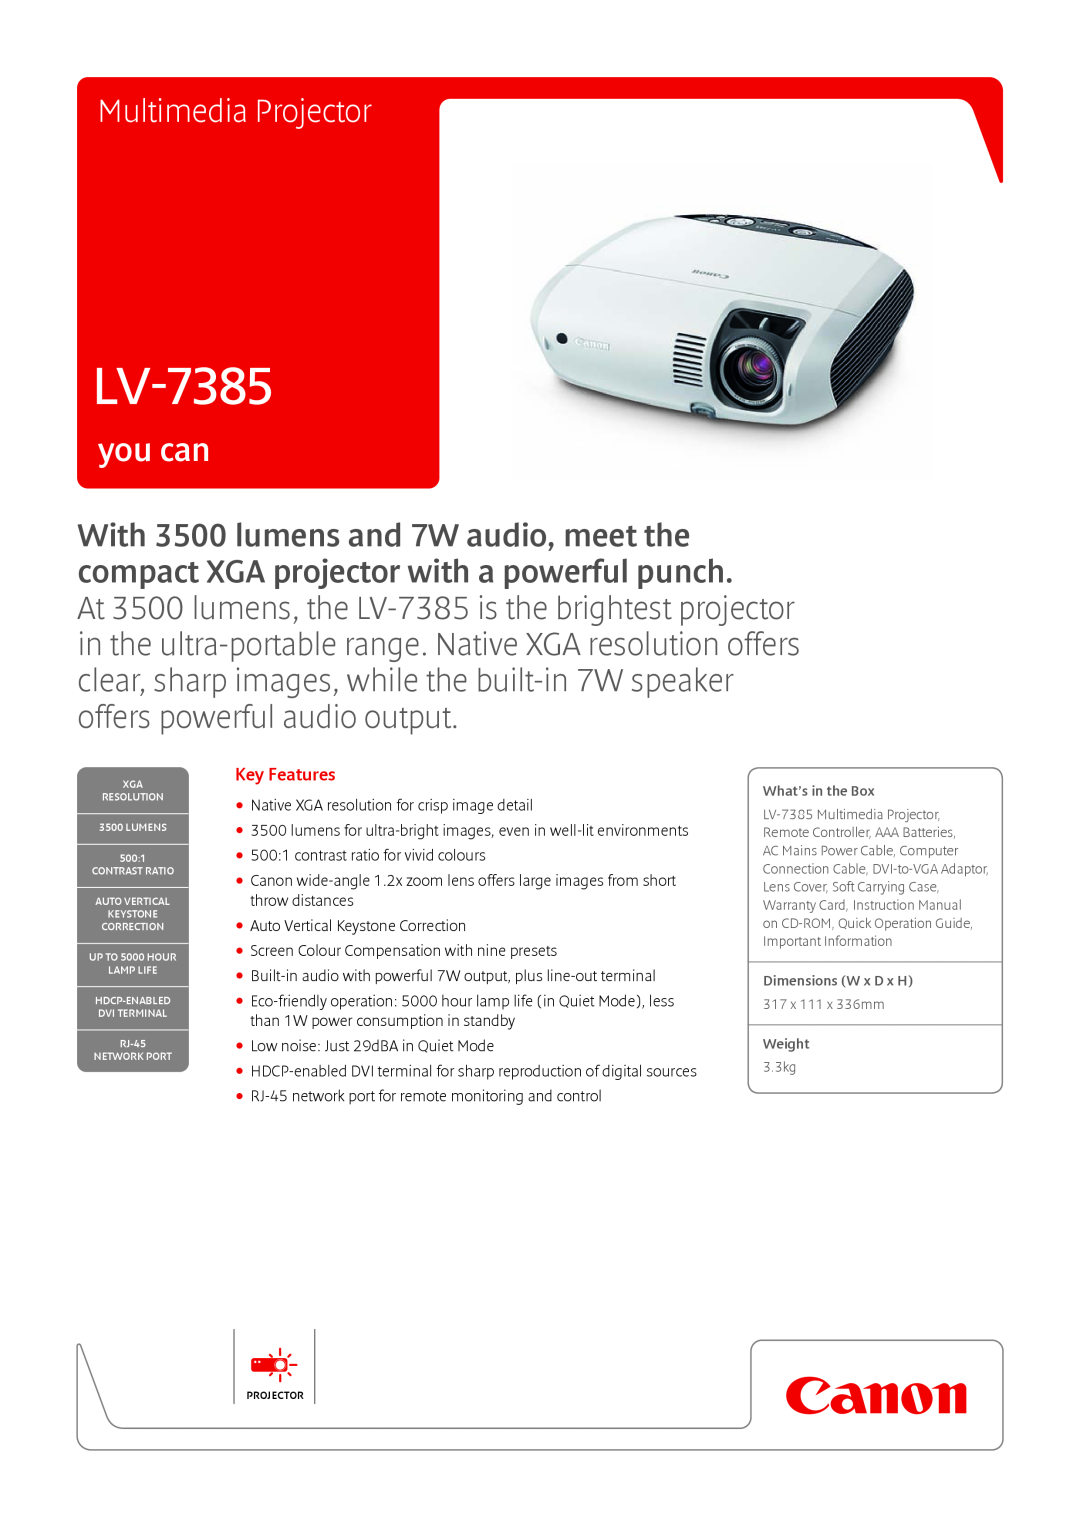 Canon LV-7385 warranty you can, Multimedia Projector, Key Features 